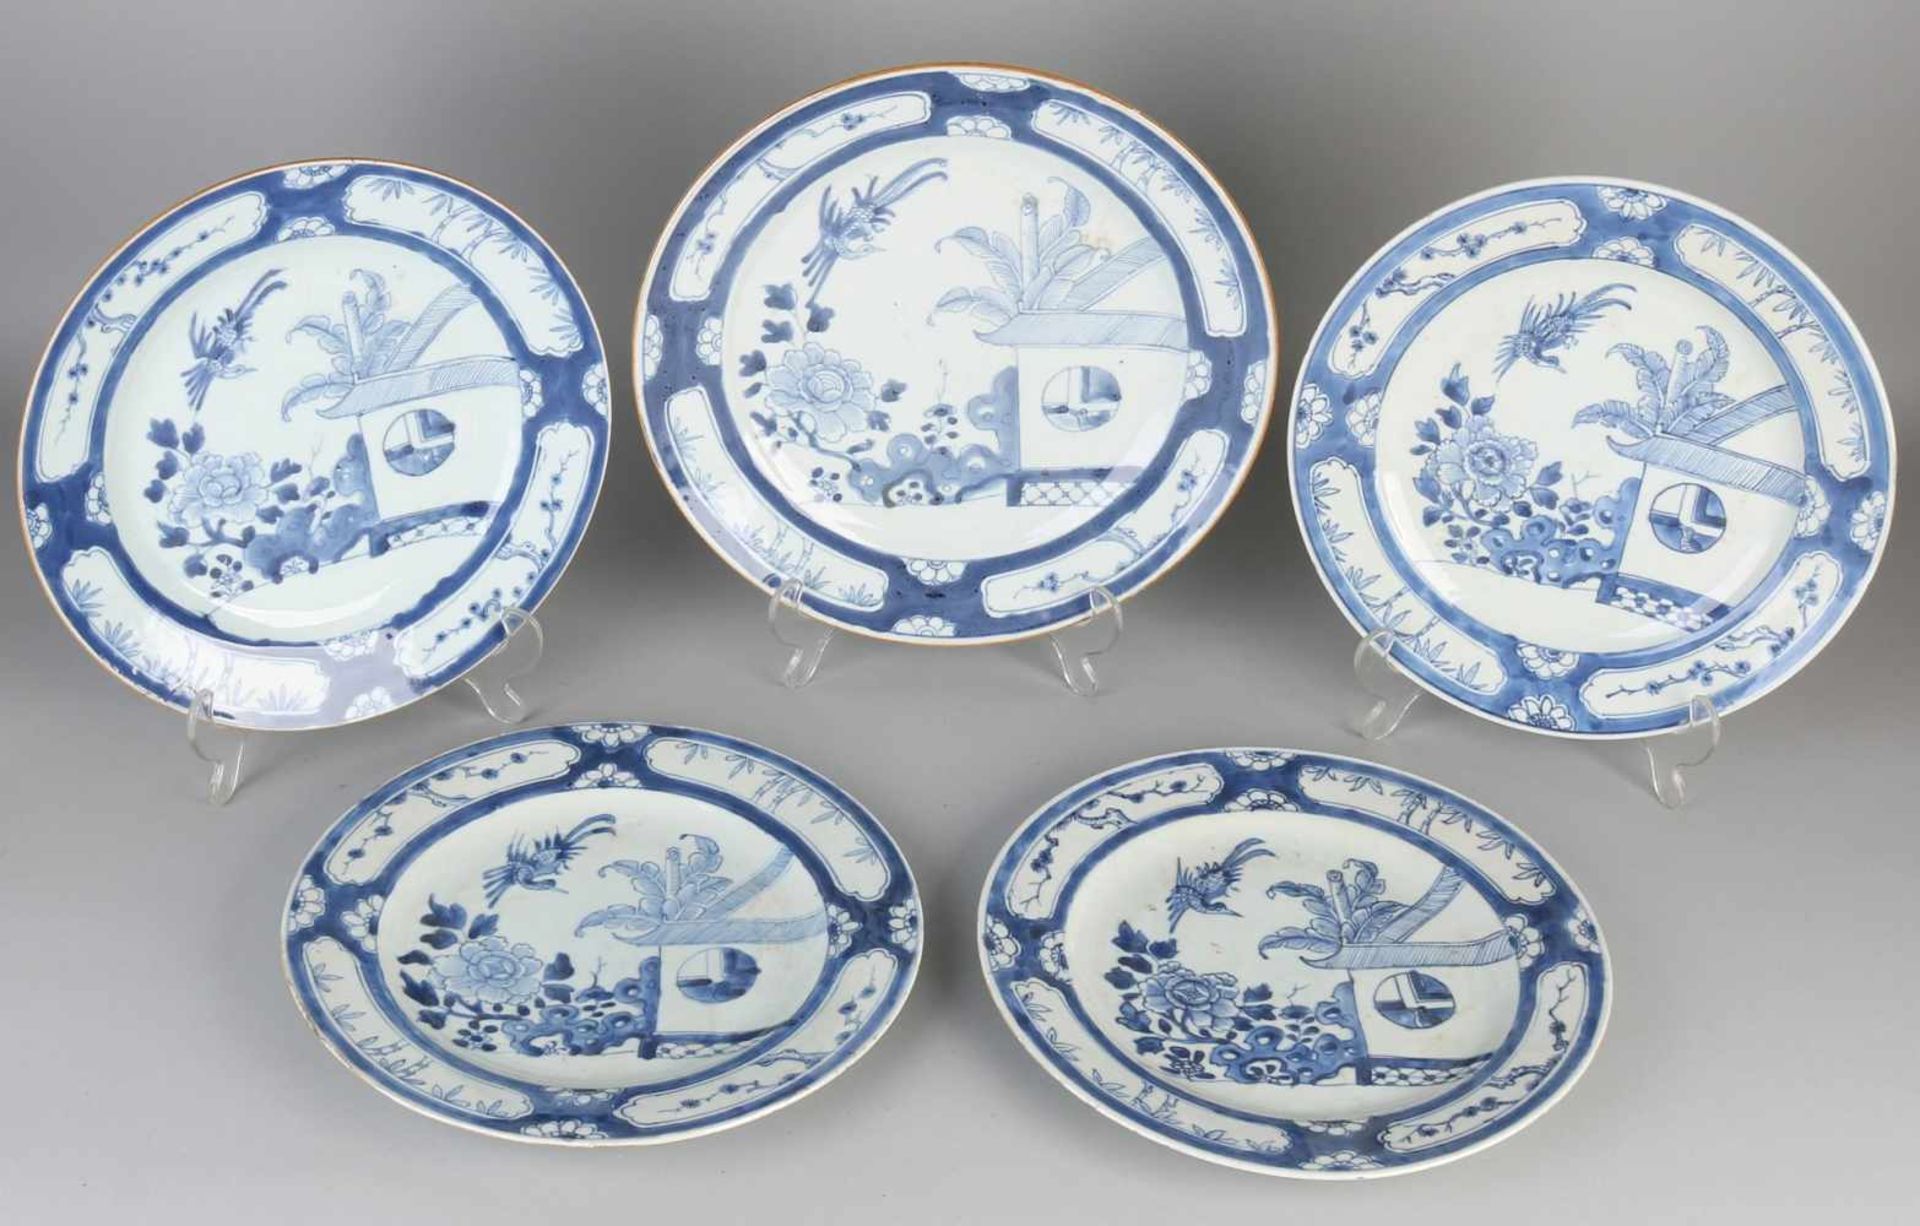 Five 18th century Chinese porcelain plates with cuckoo in cottage decor. Two plates cool, rest